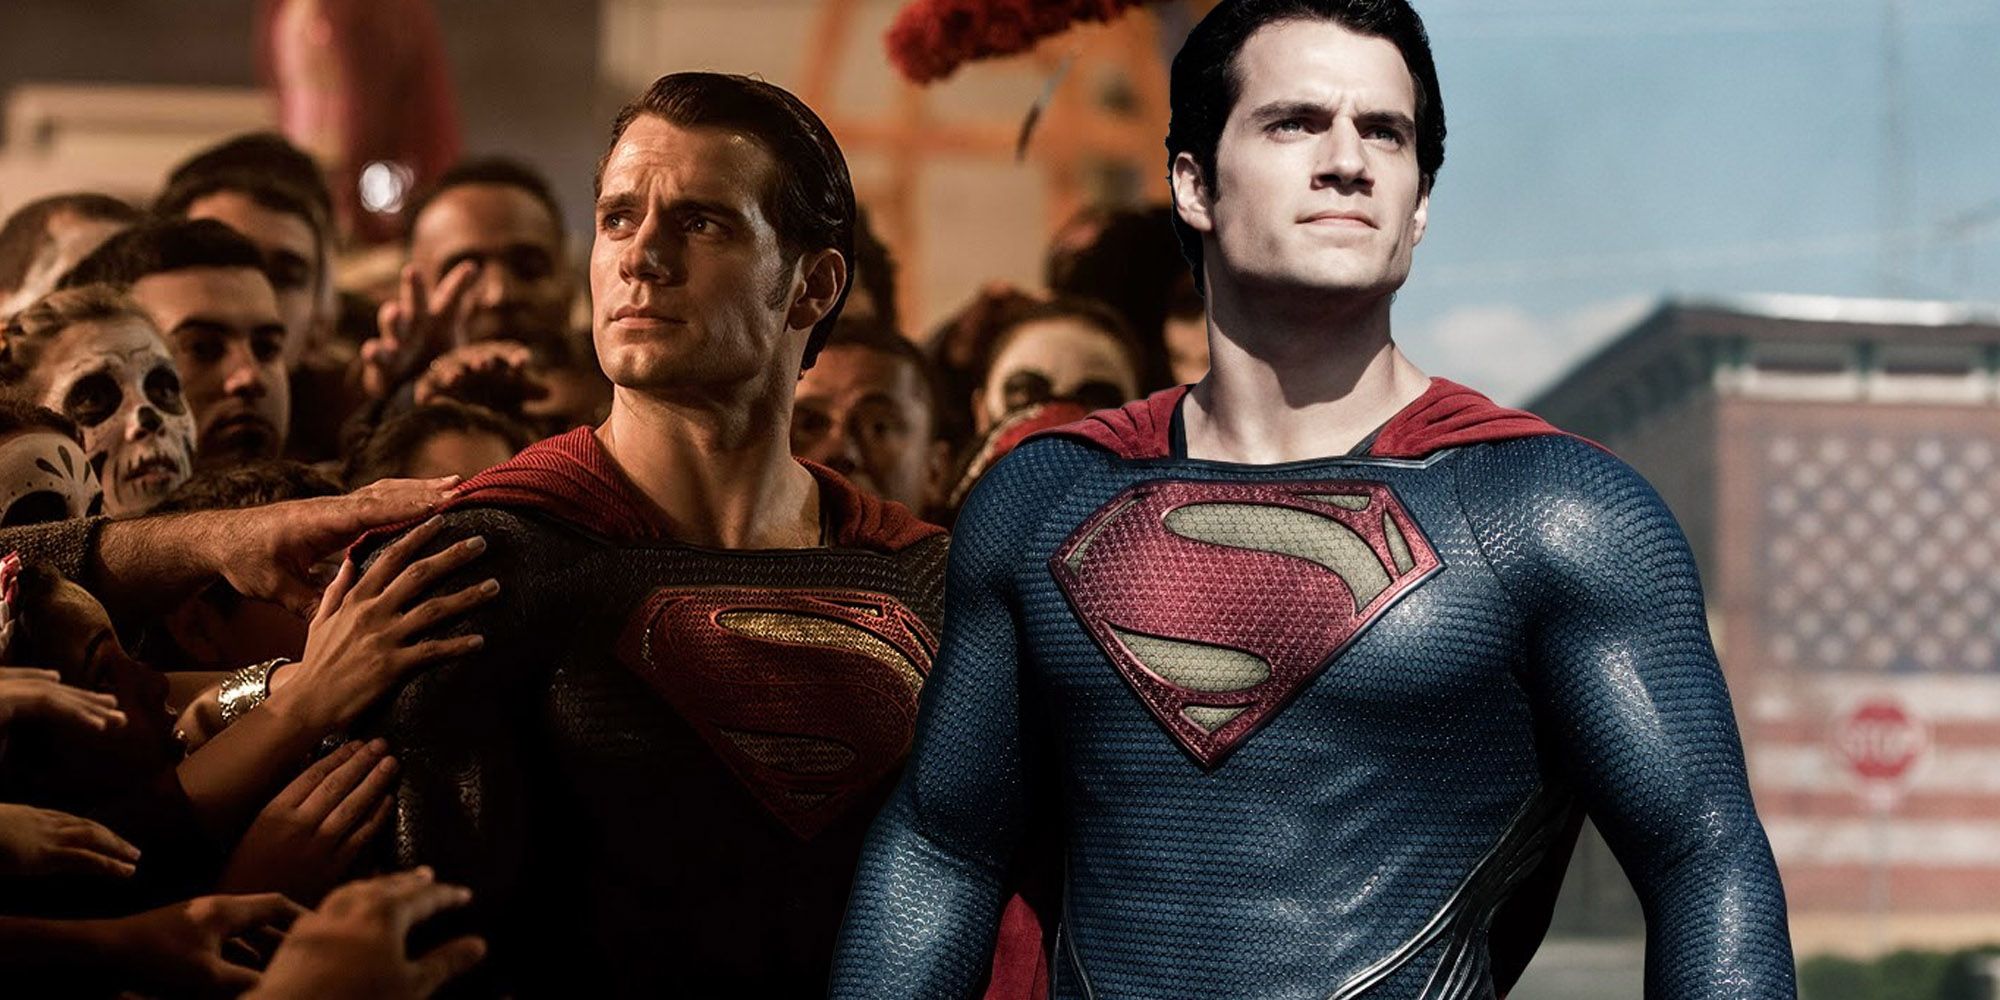 There's Already a Man of Steel Sequel - It's Batman v Superman